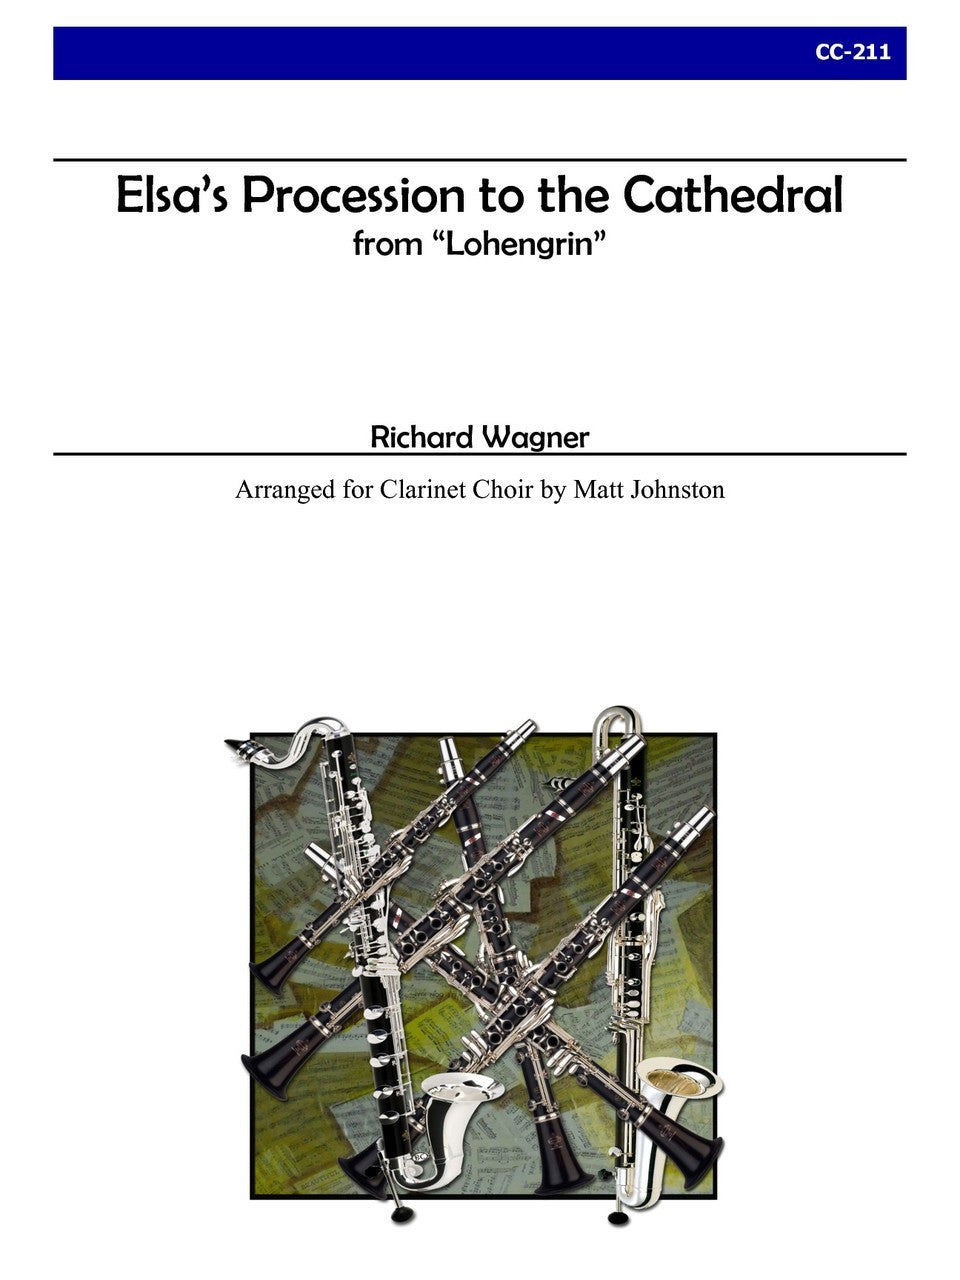 Wagner (arr. Matt Johnston) - Elsa's Procession to the Cathedral for Clarinet Choir